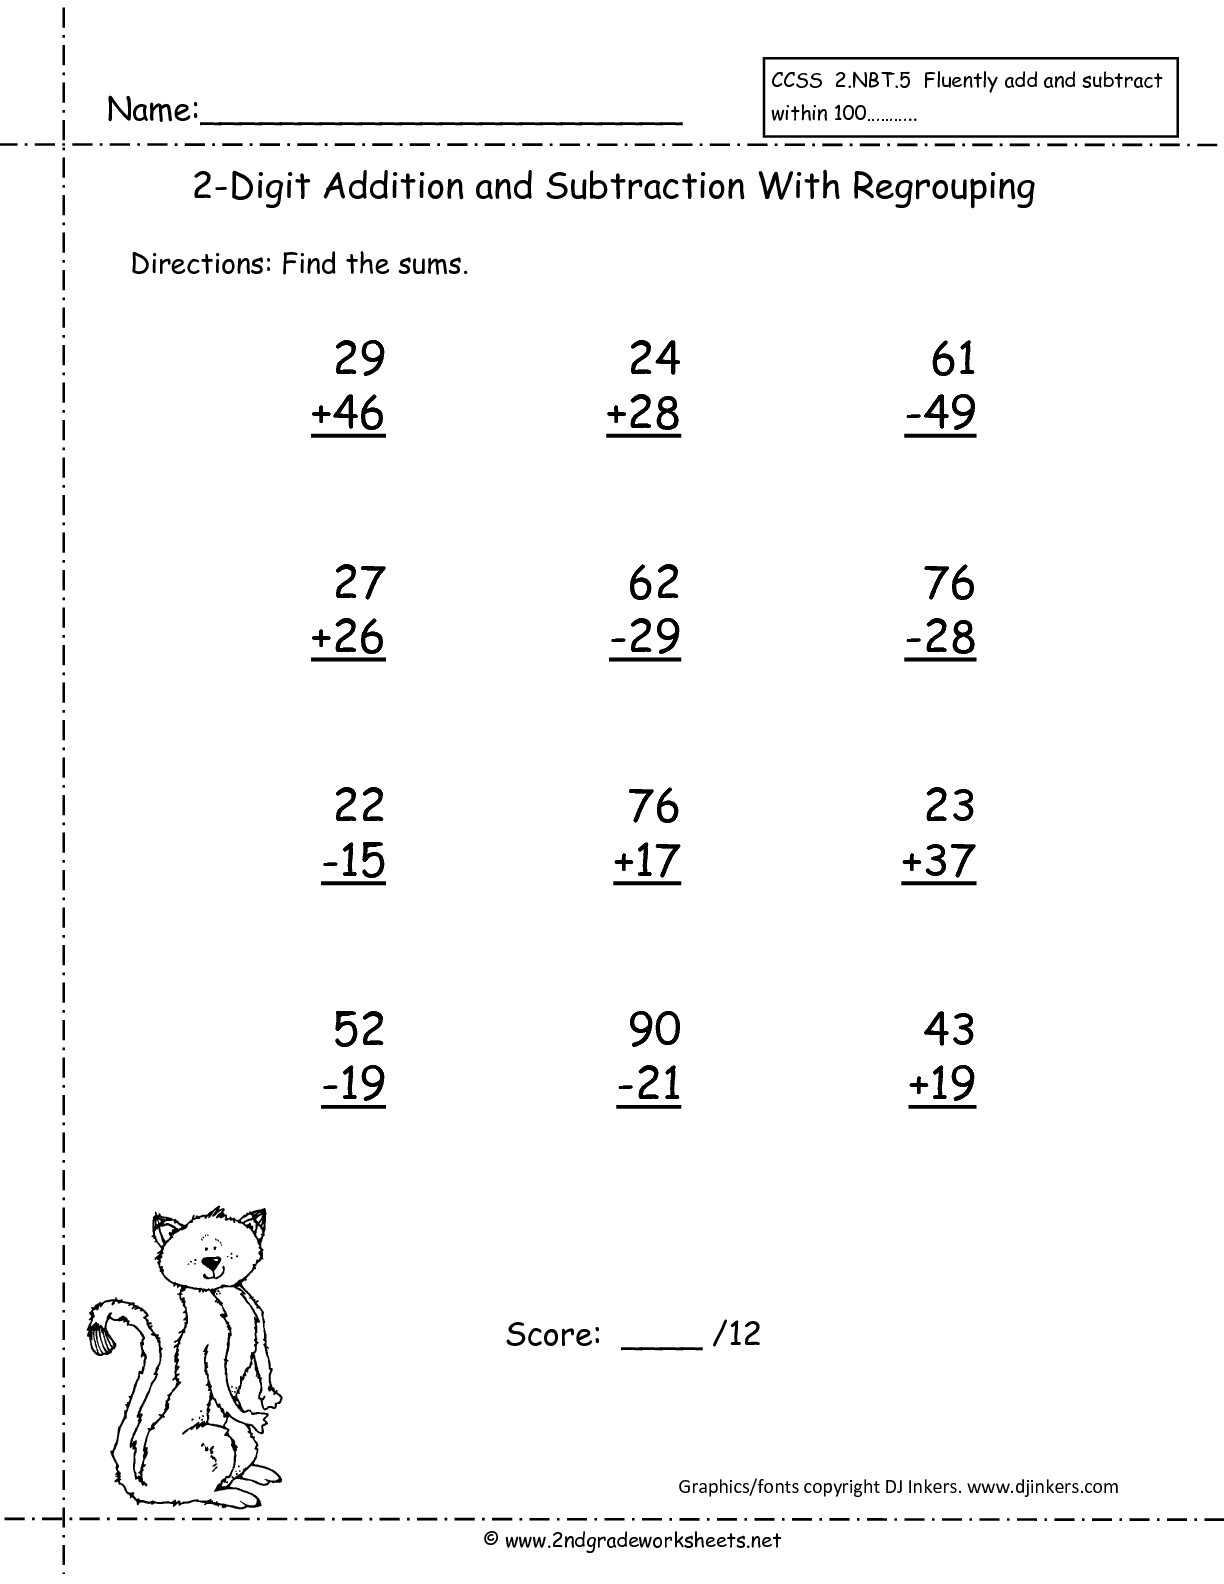 Ccss 2.nbt.5 Worksheets. Two Digit Addition And Subtraction Within - Free Printable Double Digit Addition And Subtraction Worksheets